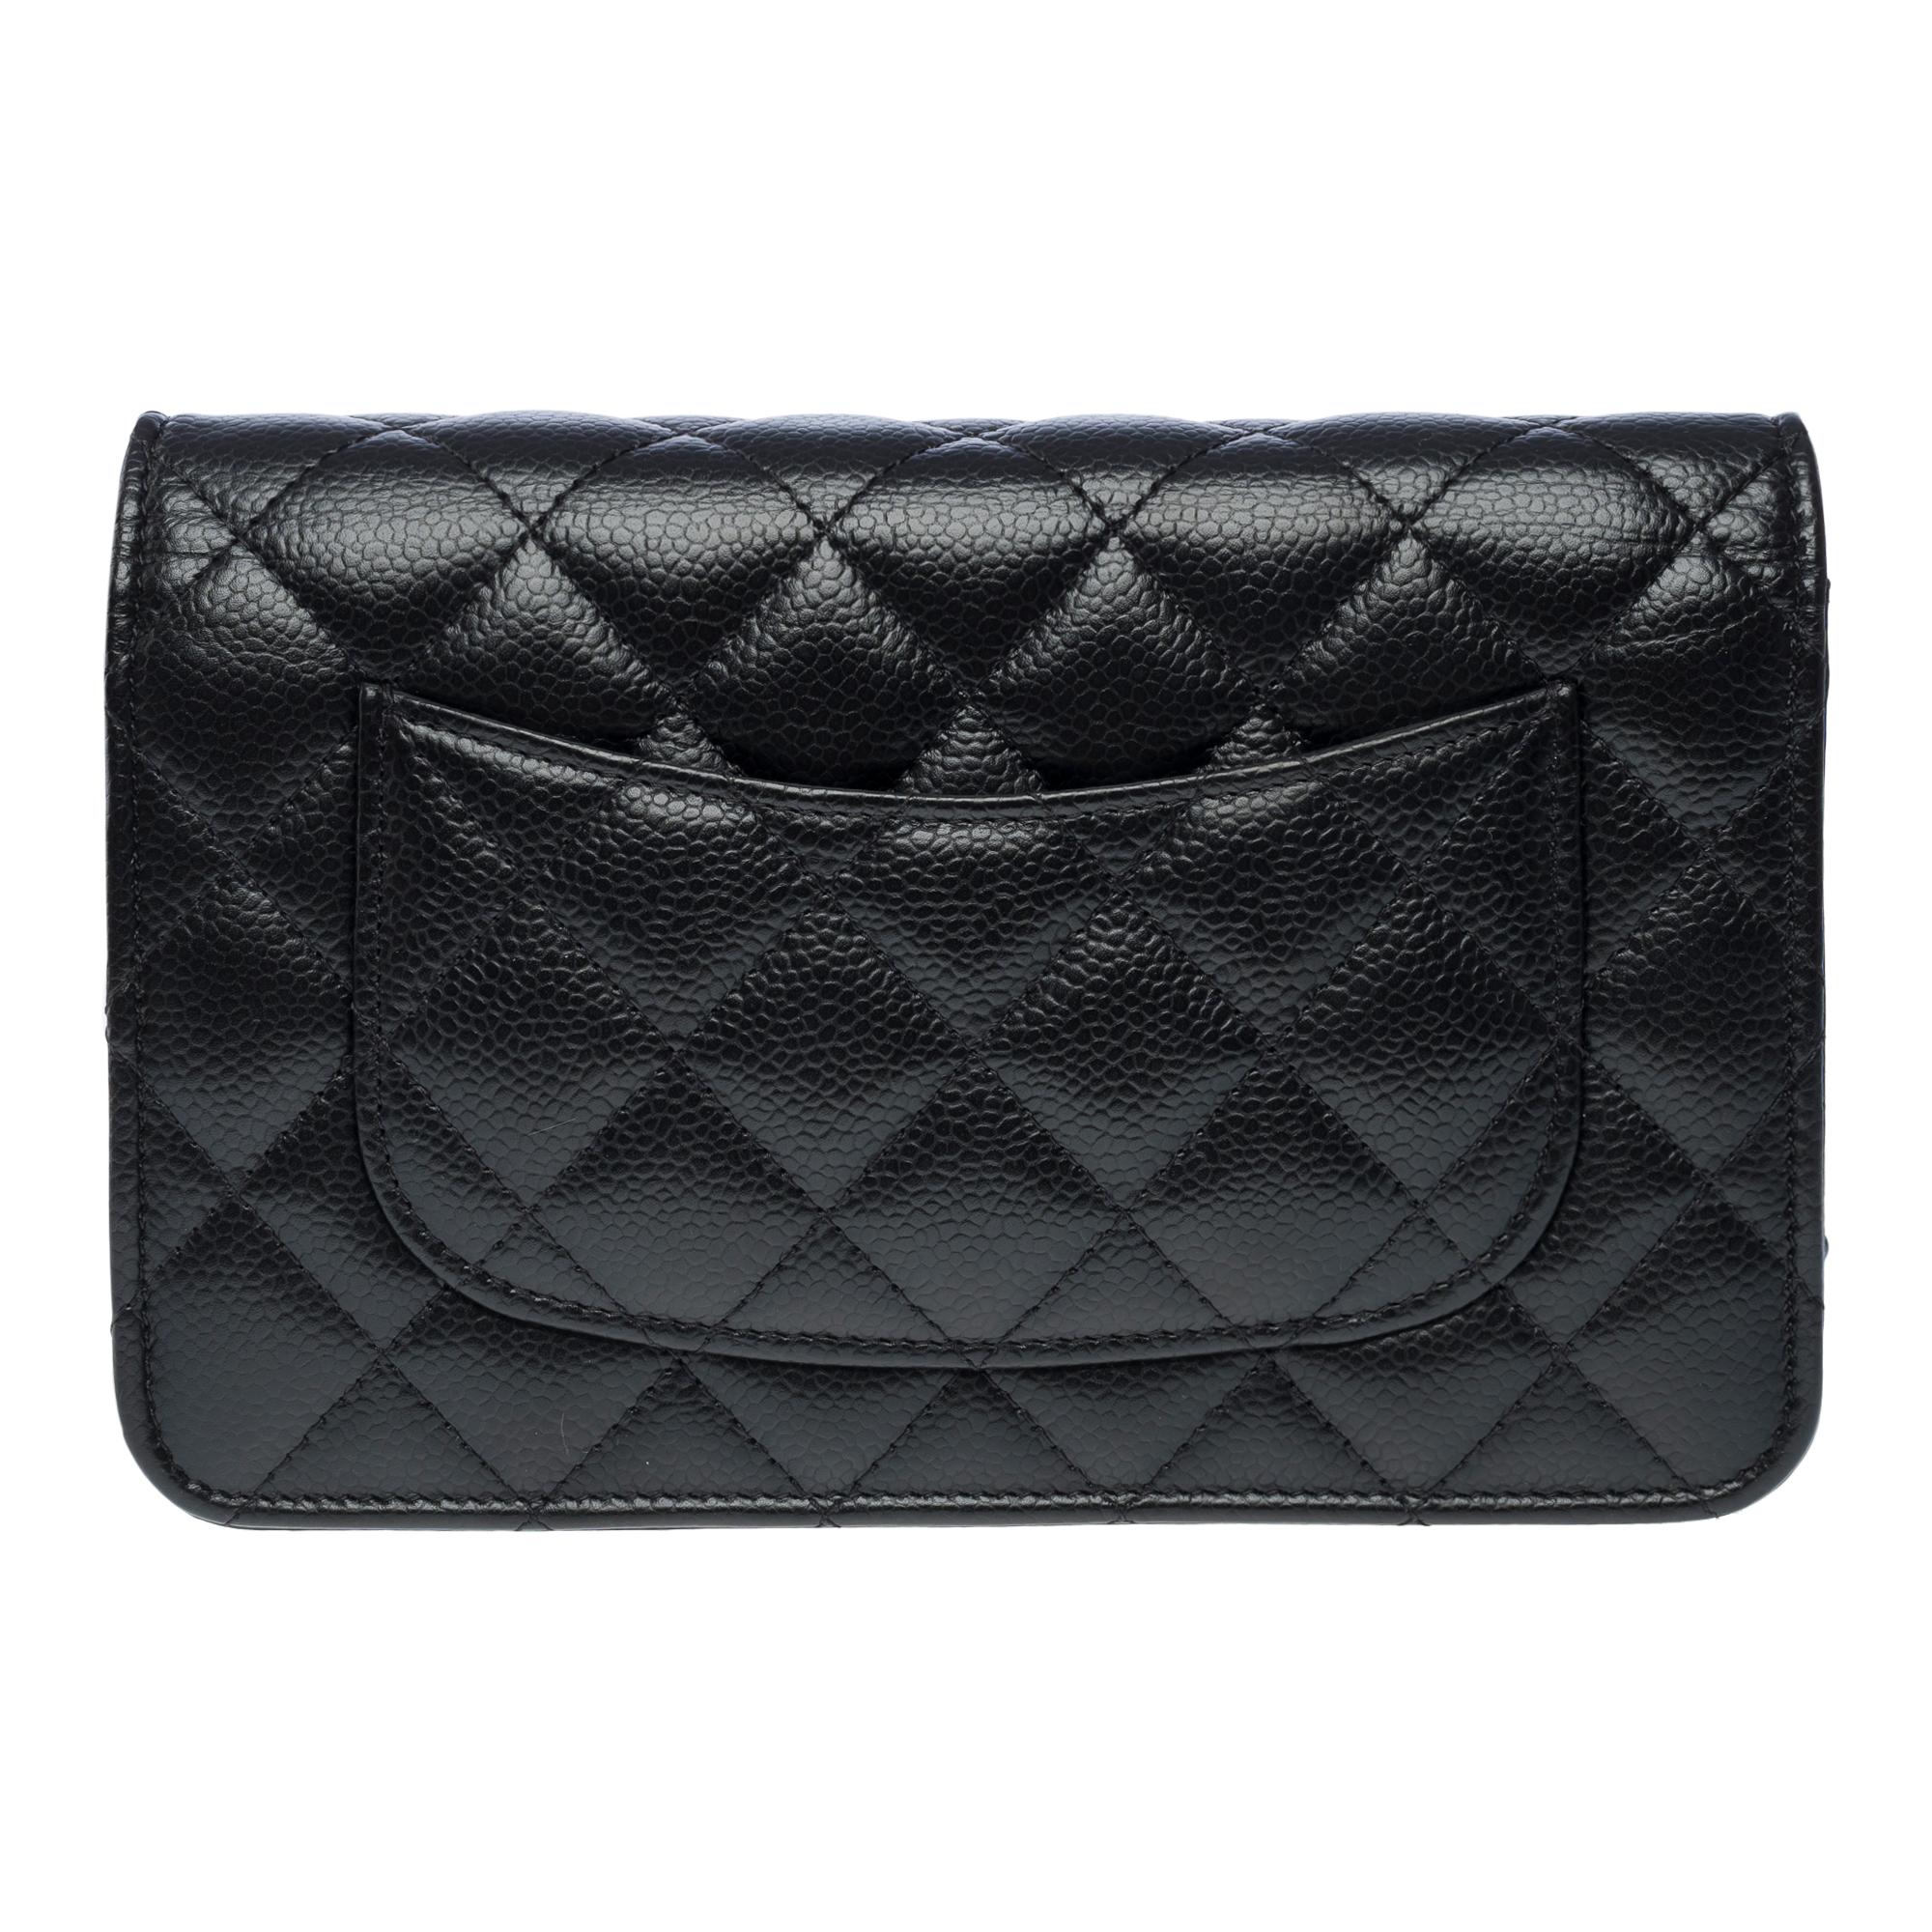 Women's Chanel Wallet on Chain (WOC)  shoulder bag in black Caviar quilted leather, GHW For Sale